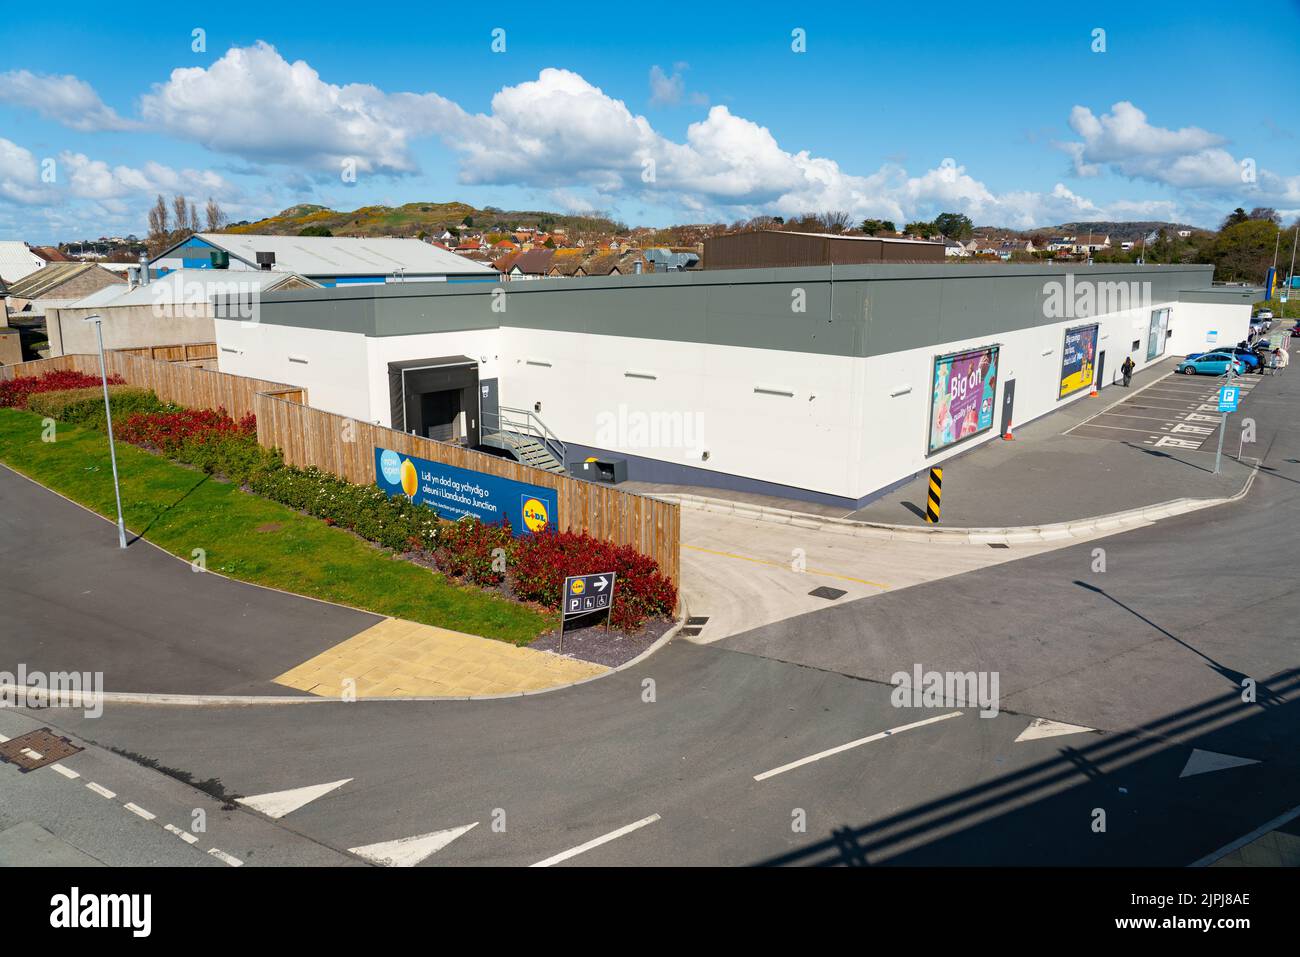 The brand new Lidl Supermarket in Llandudno Junction, North Wales. Image taken in March 2022. Stock Photo